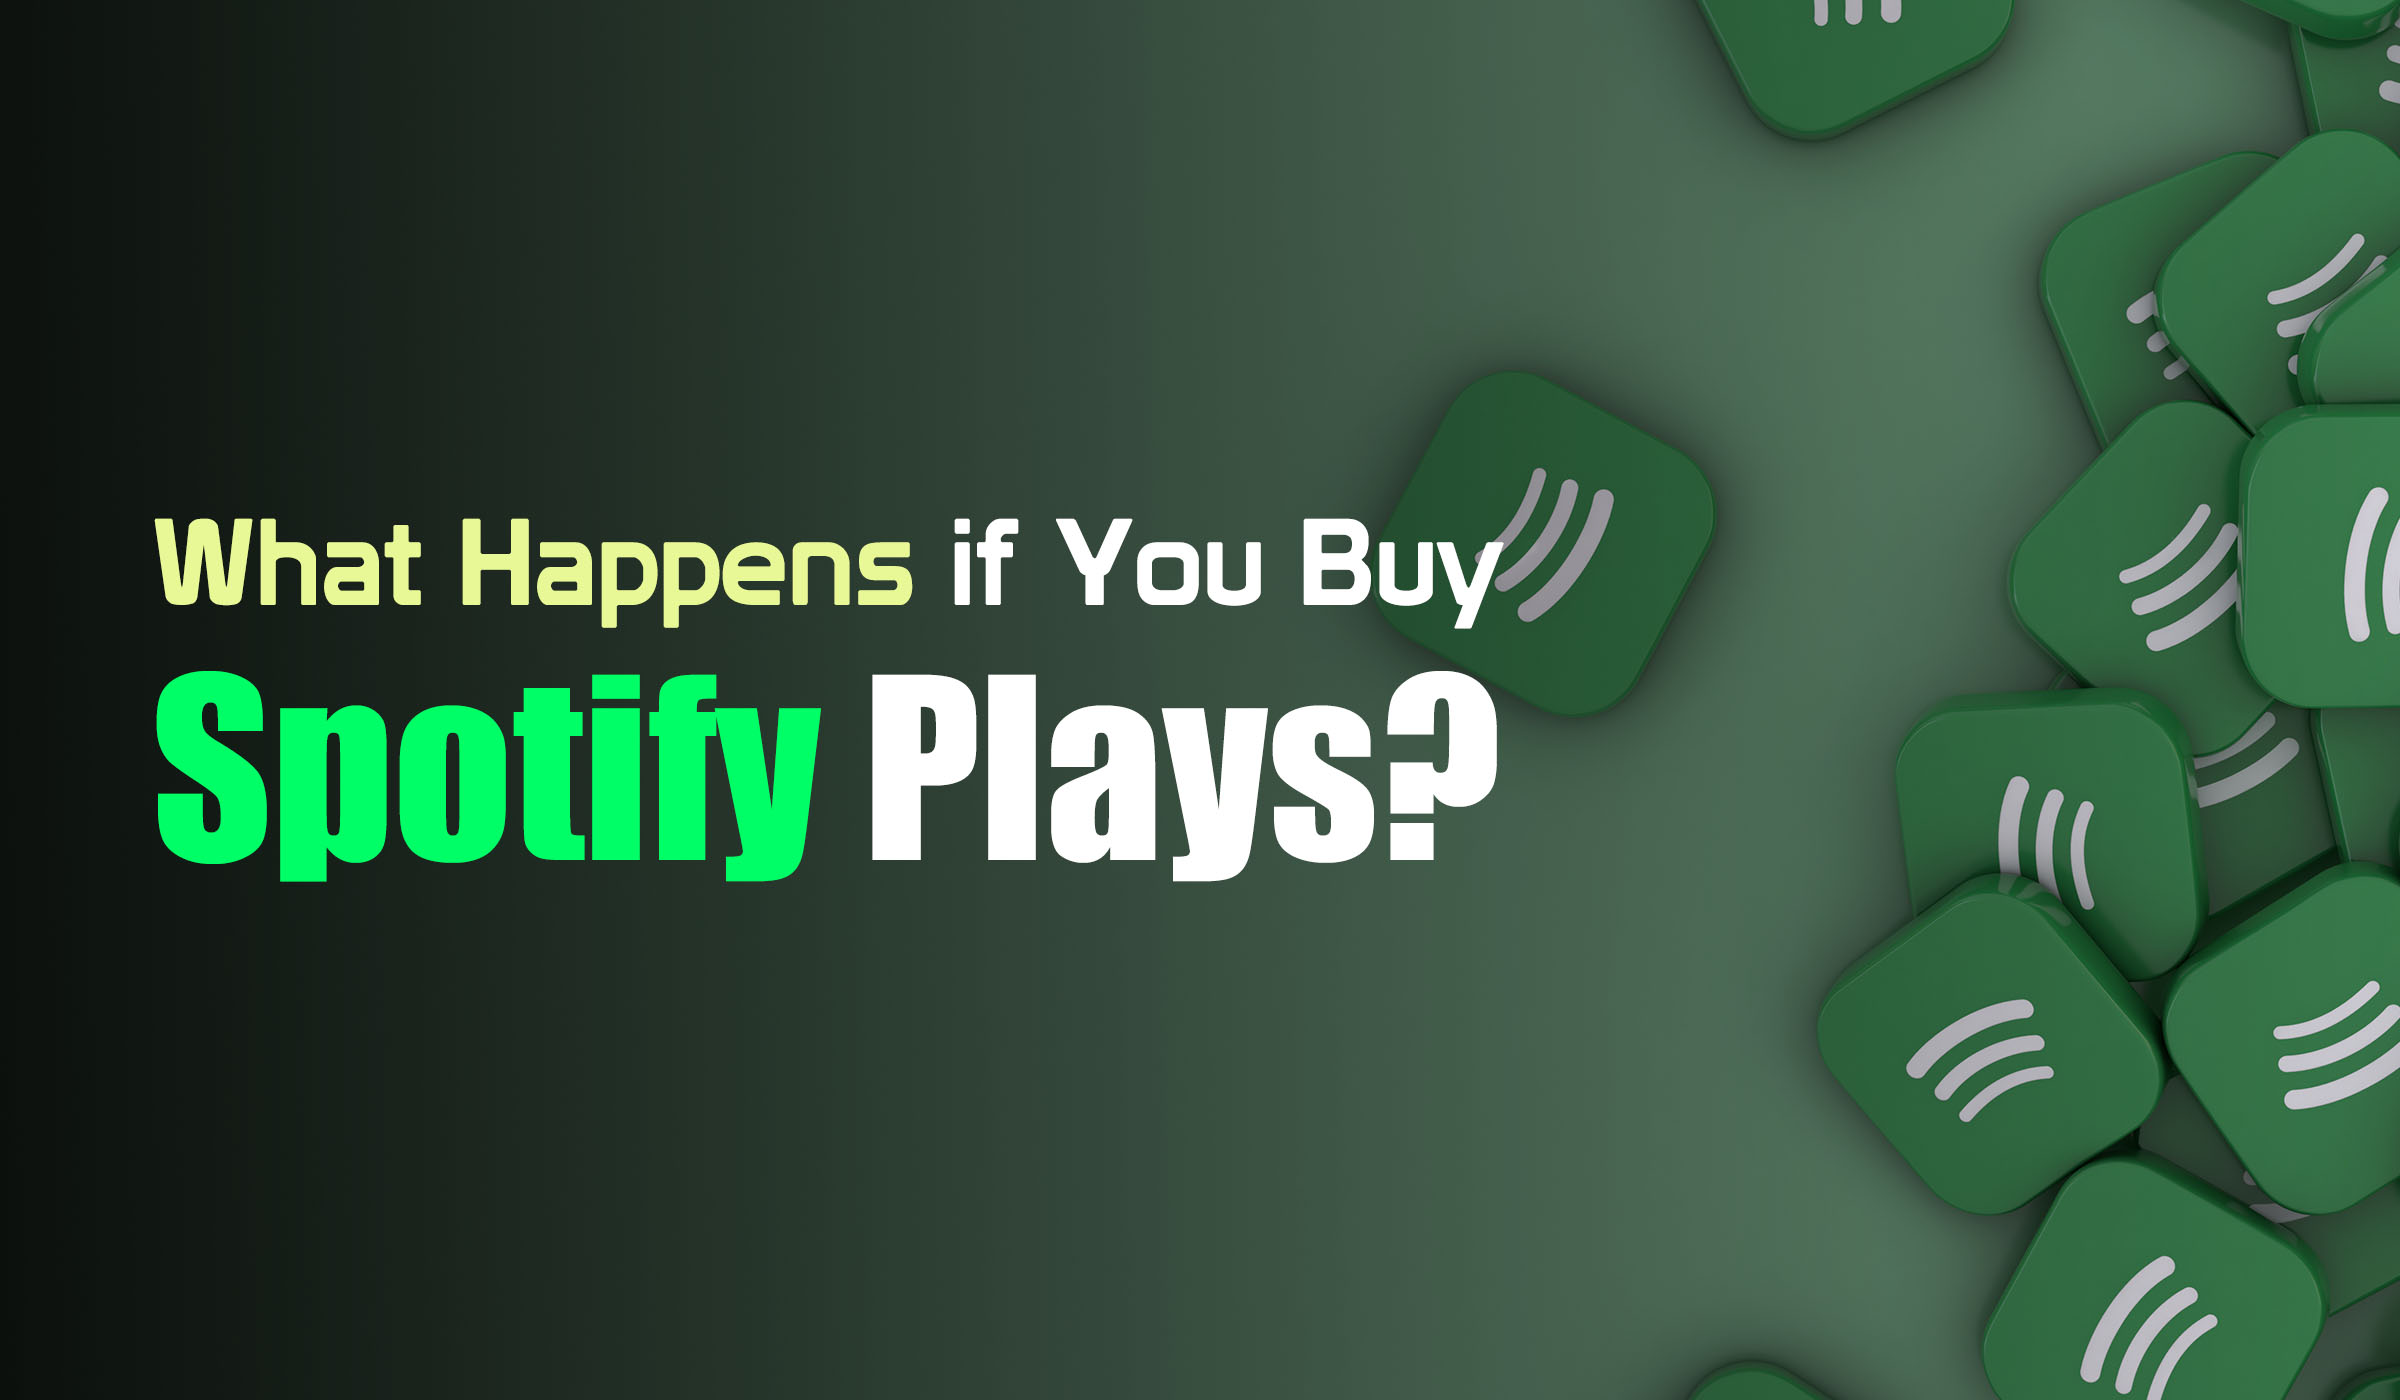 What Happens if You Buy Spotify Plays